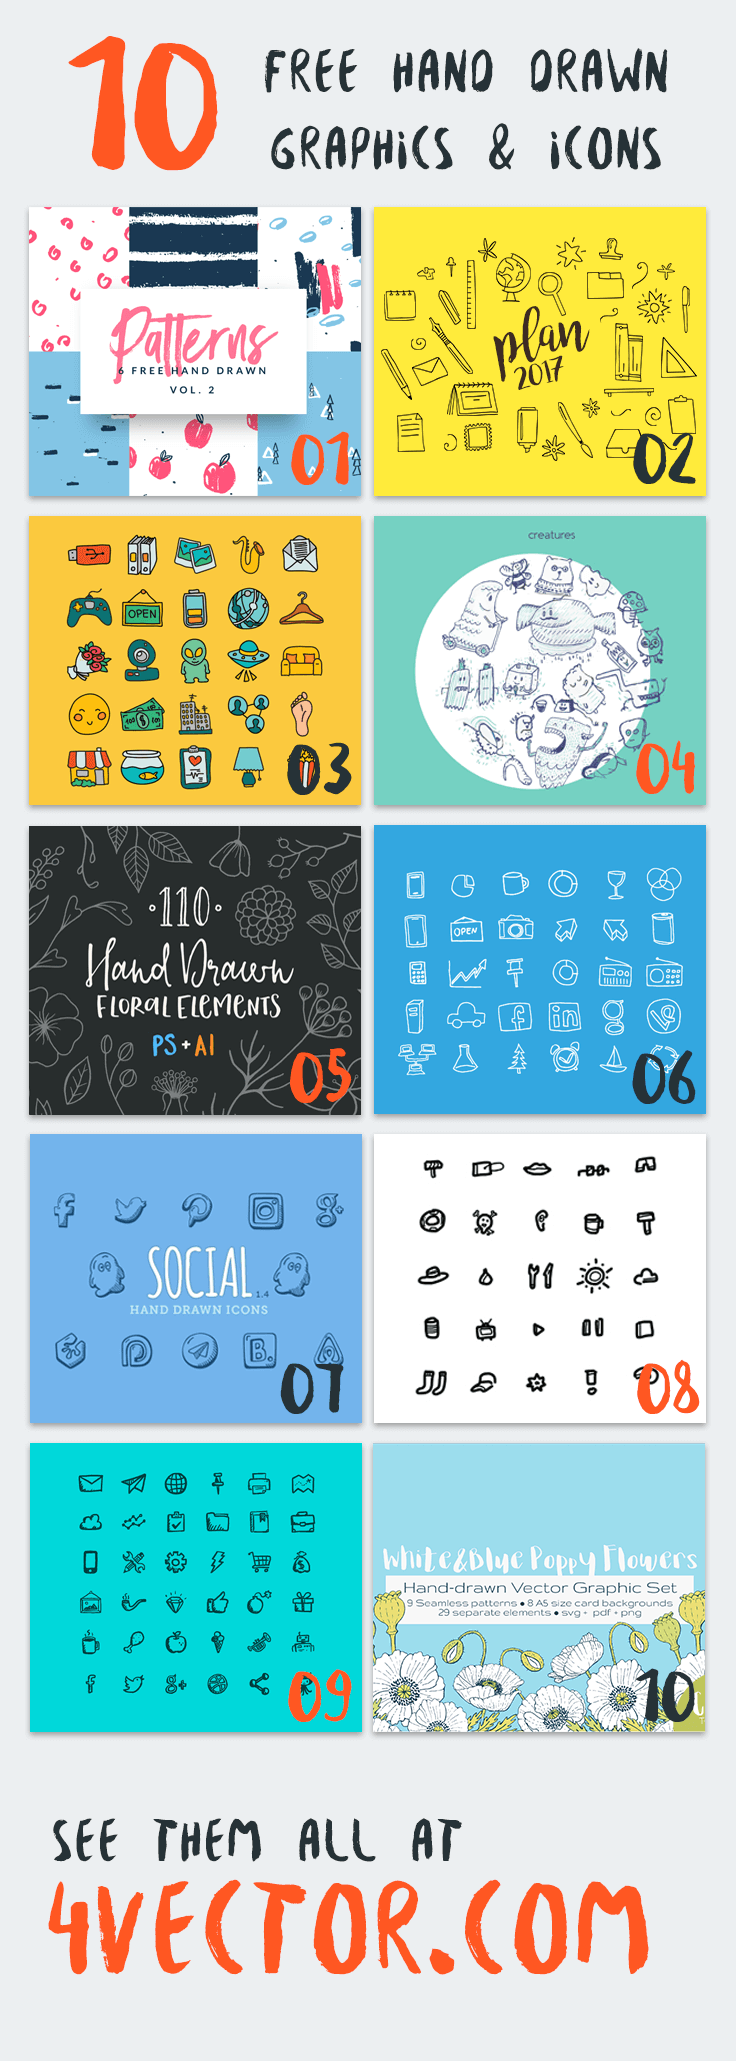 10 Attention-Grabbing Vector Graphics & Icons to Download for Free Right Now!